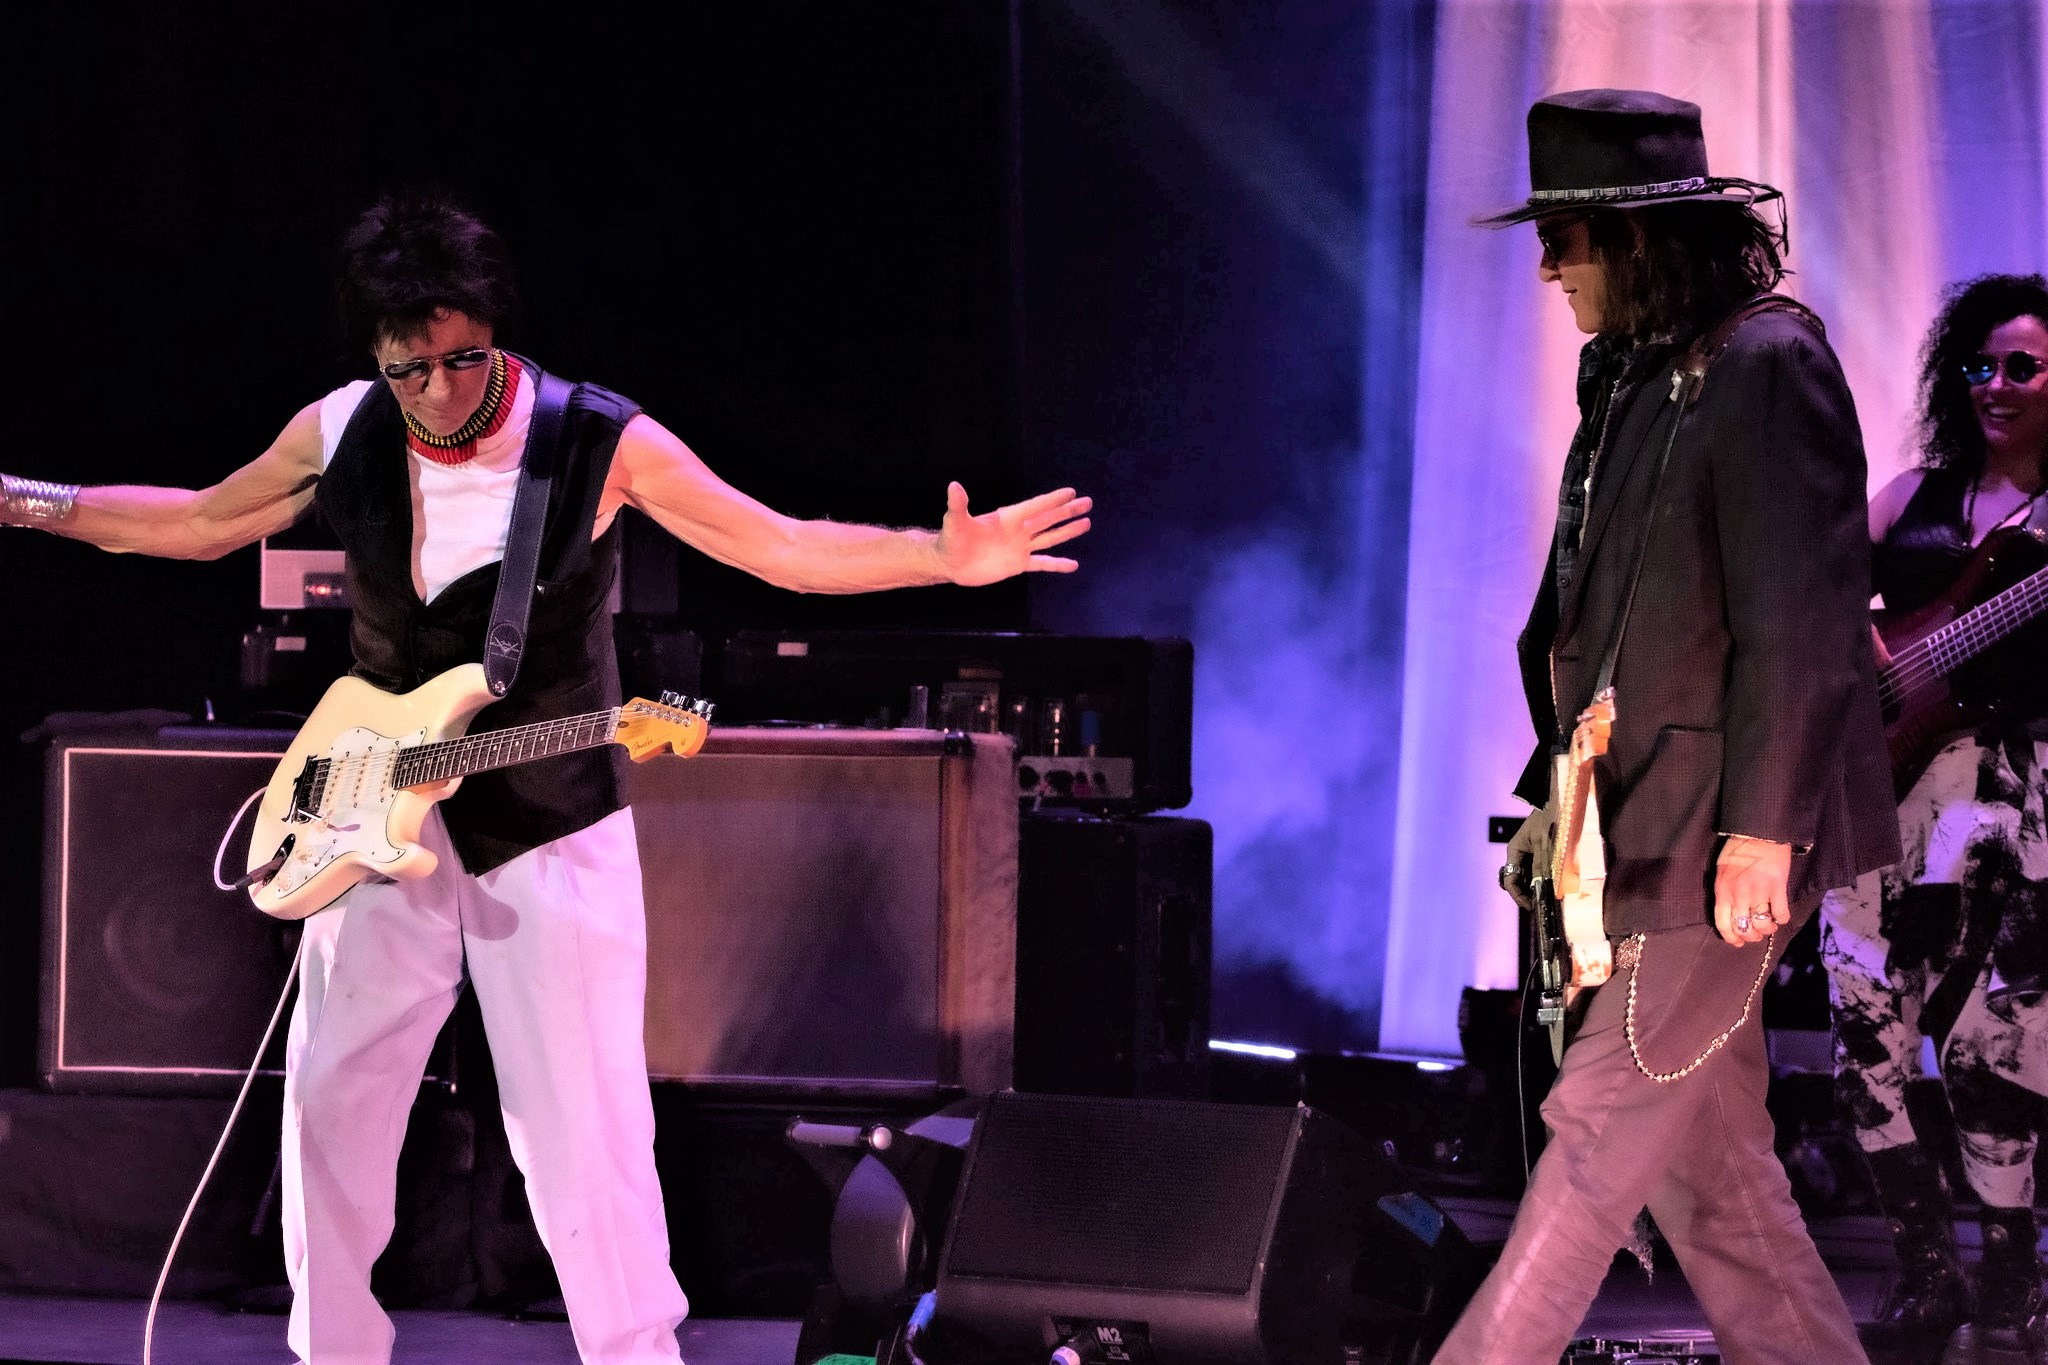 Johnny Depp joins Jeff Beck on stage in Thousand Oaks, CA